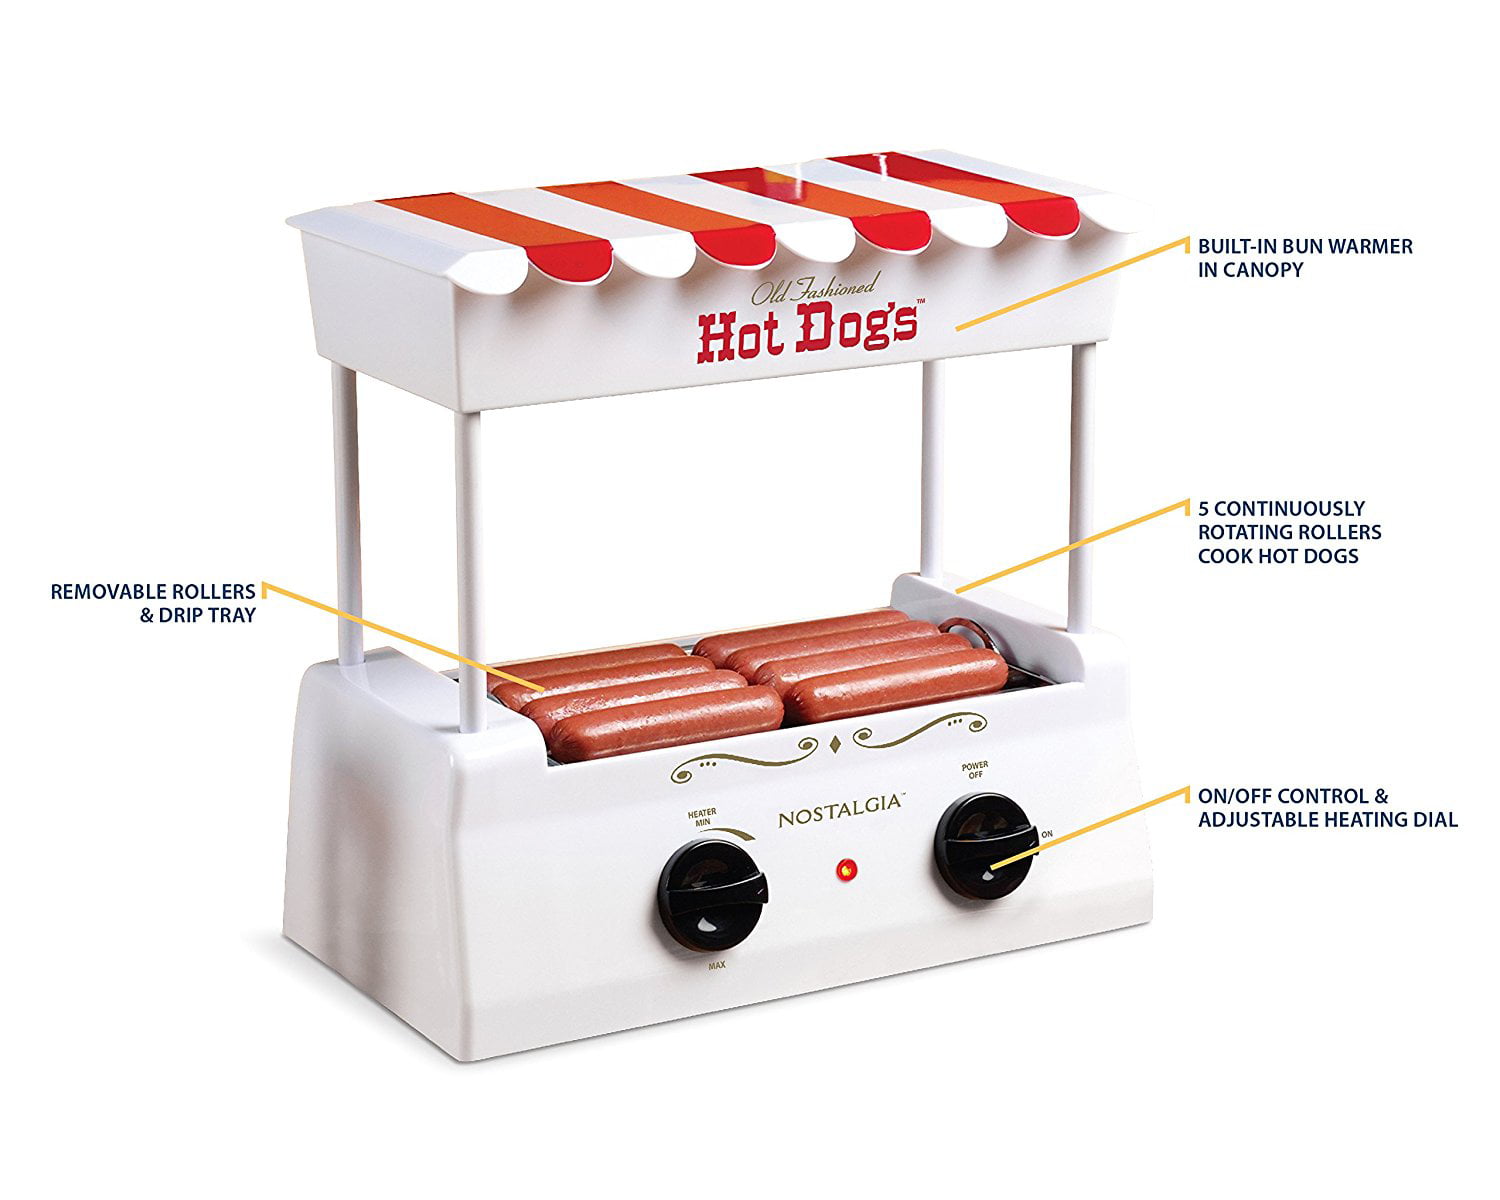 Details about   Nostalgia Grill Hot Dog Roller Bun Warmer Electric Programmable Warming Drawer 